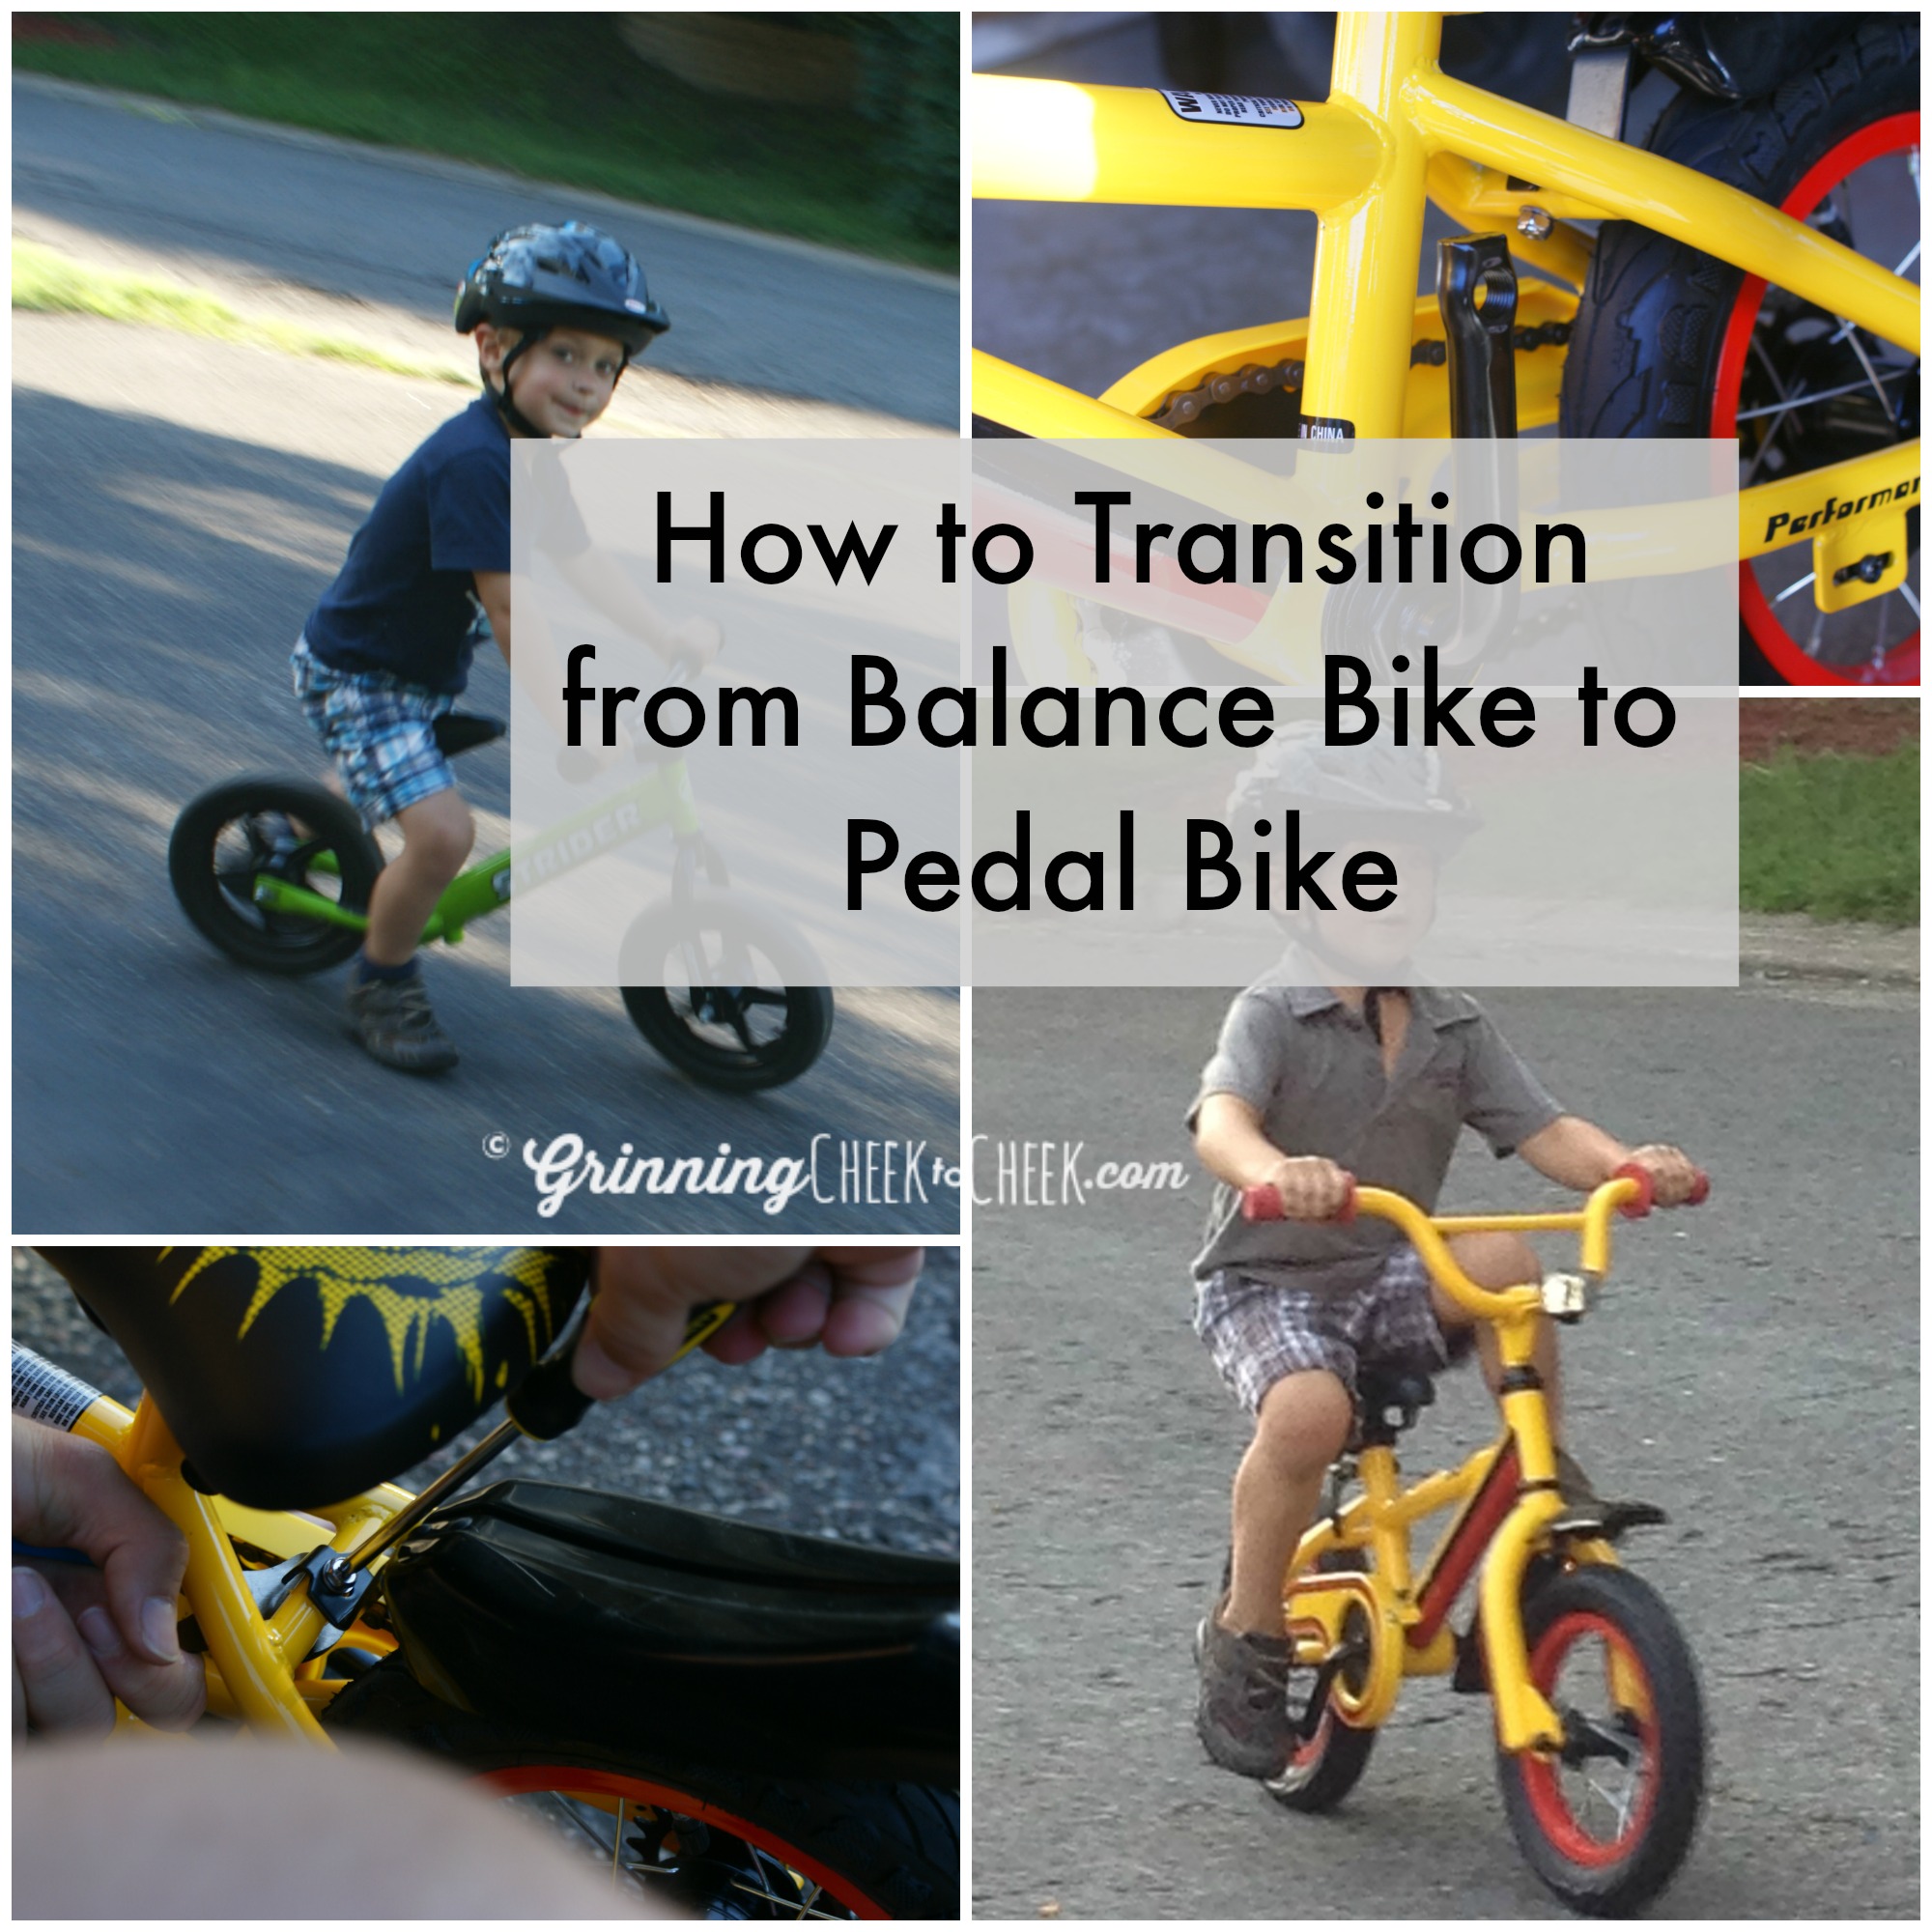 How to Transition From Balance Bike to Pedal Bike Without Training Wheels